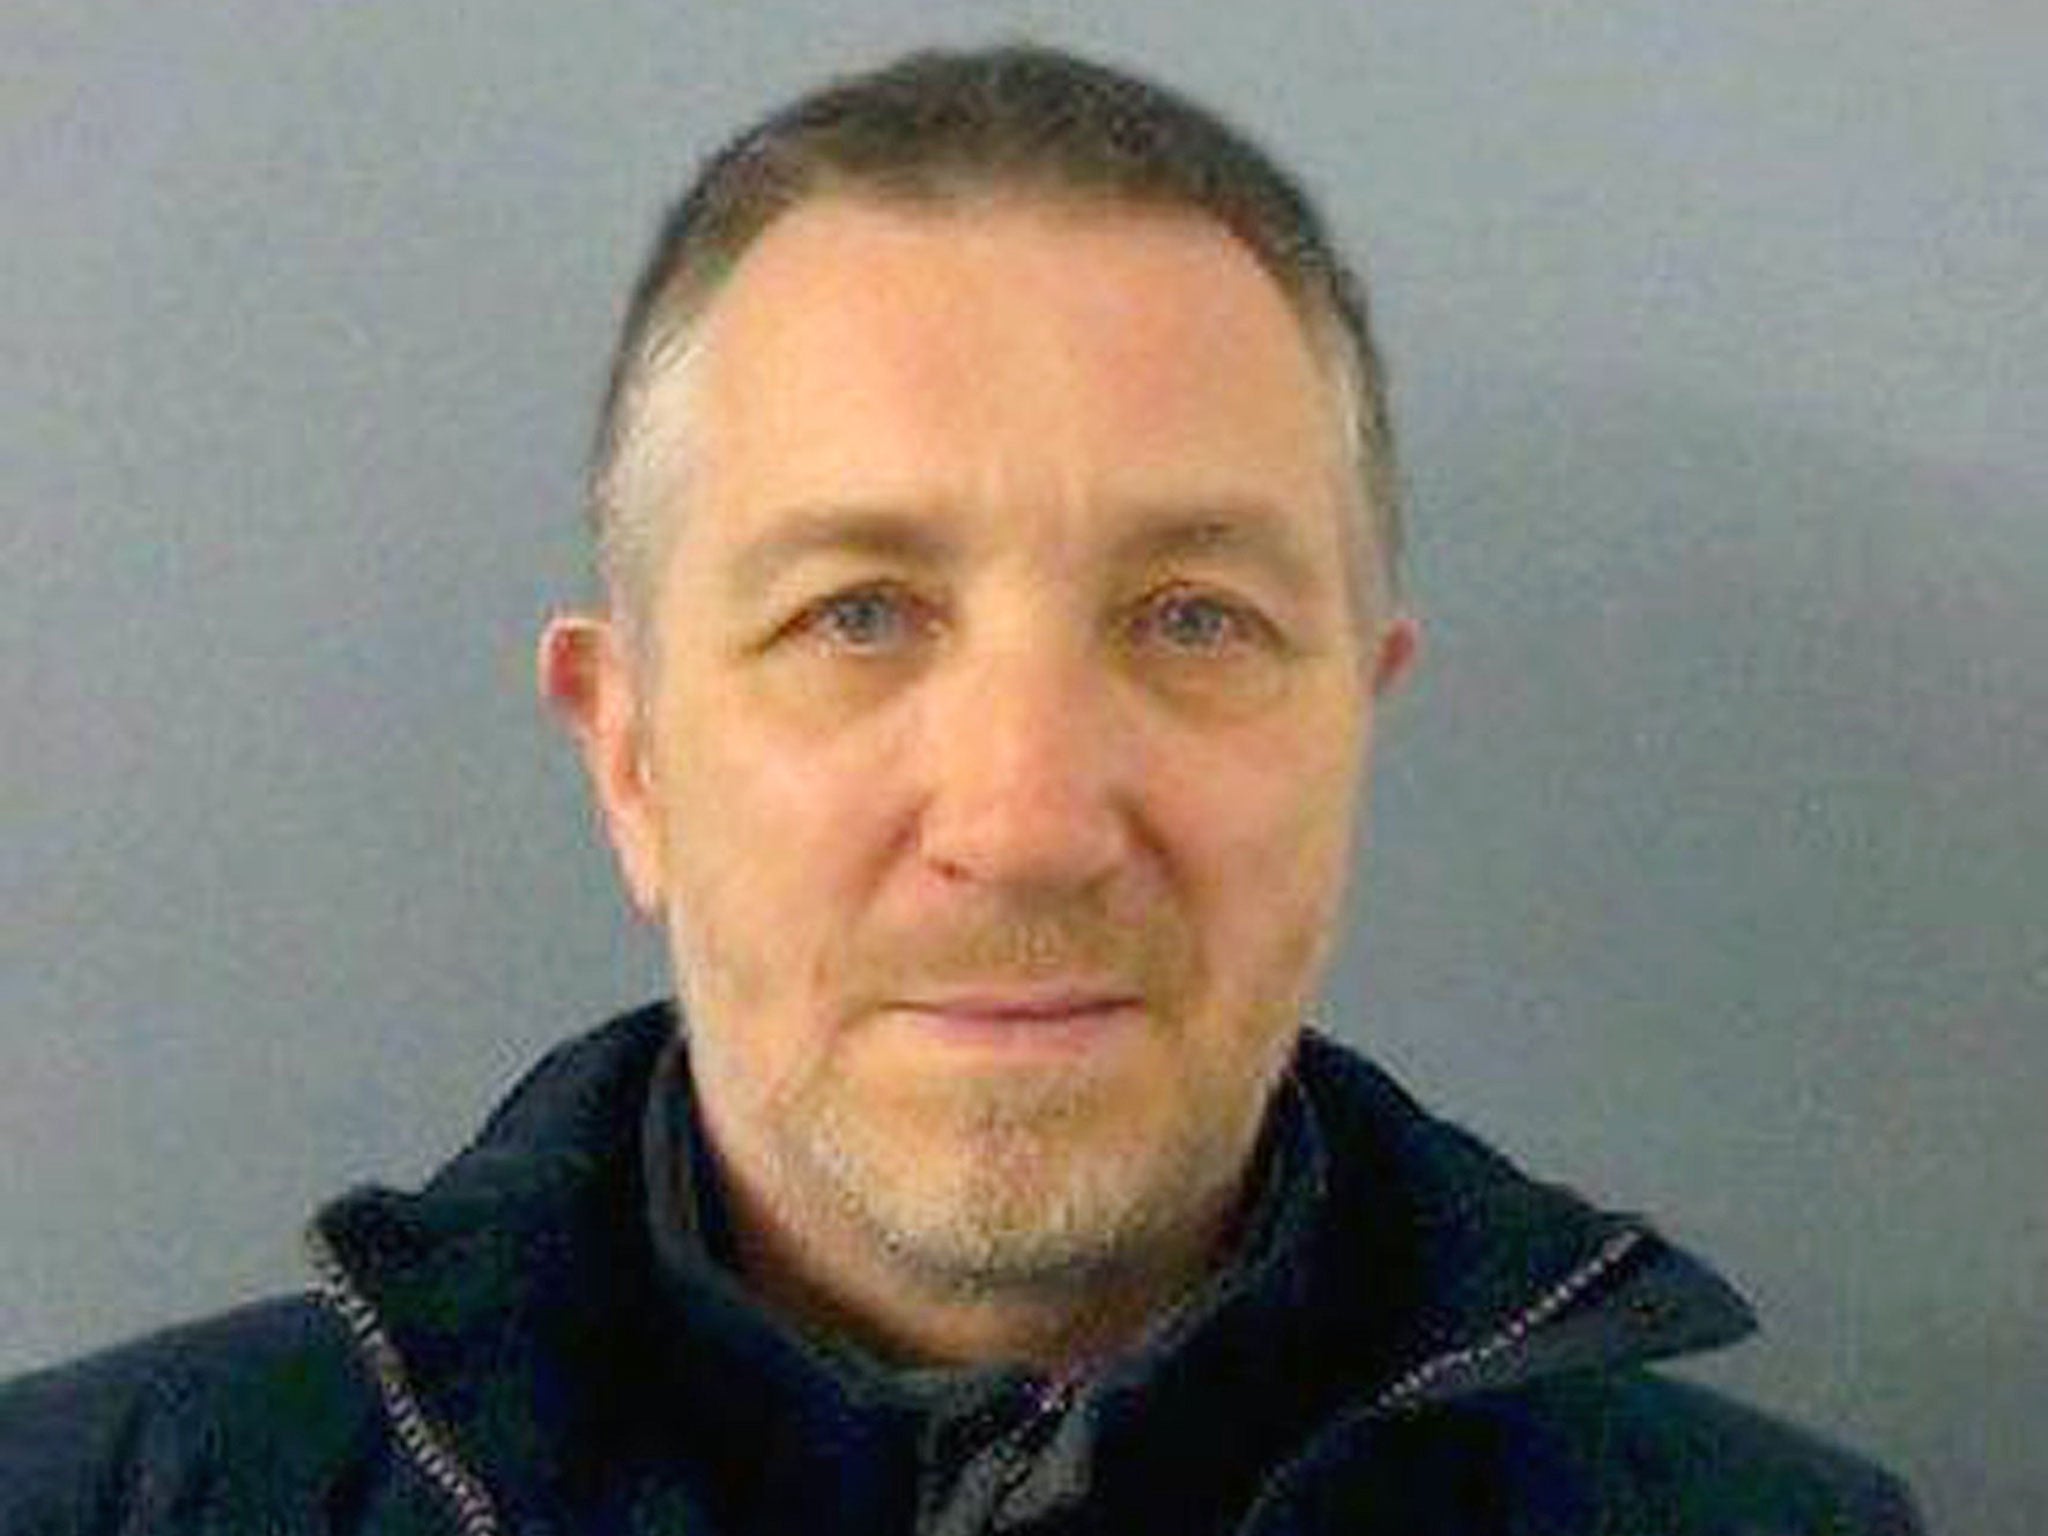 Photo issued by the City of London Police of Philip Pickett who has been jailed for 11 years for sex attacks at the Guildhall School of Music and Drama in London